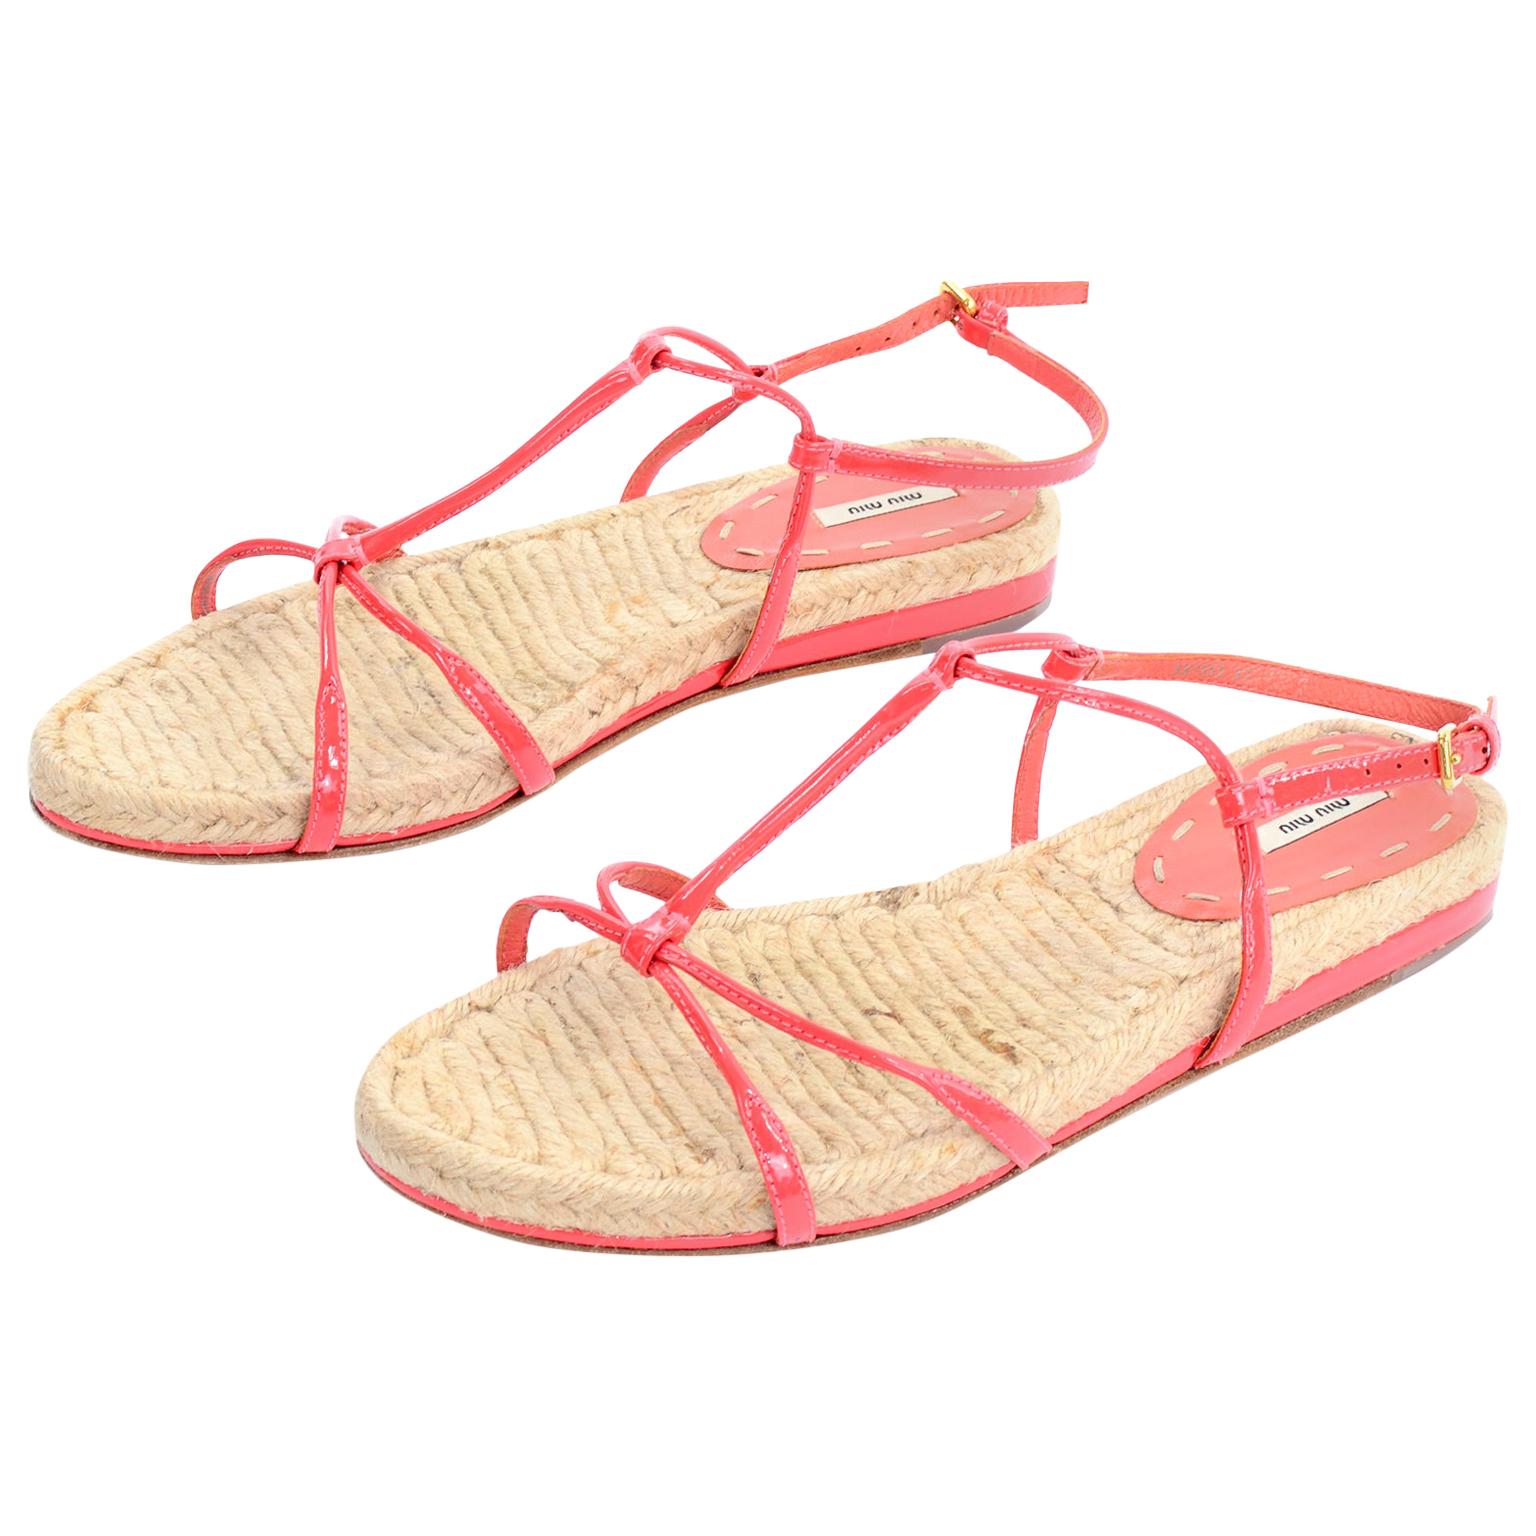 Miu Miu Coral Ankle Strap Leather & Woven Straw Sandals Size 37	